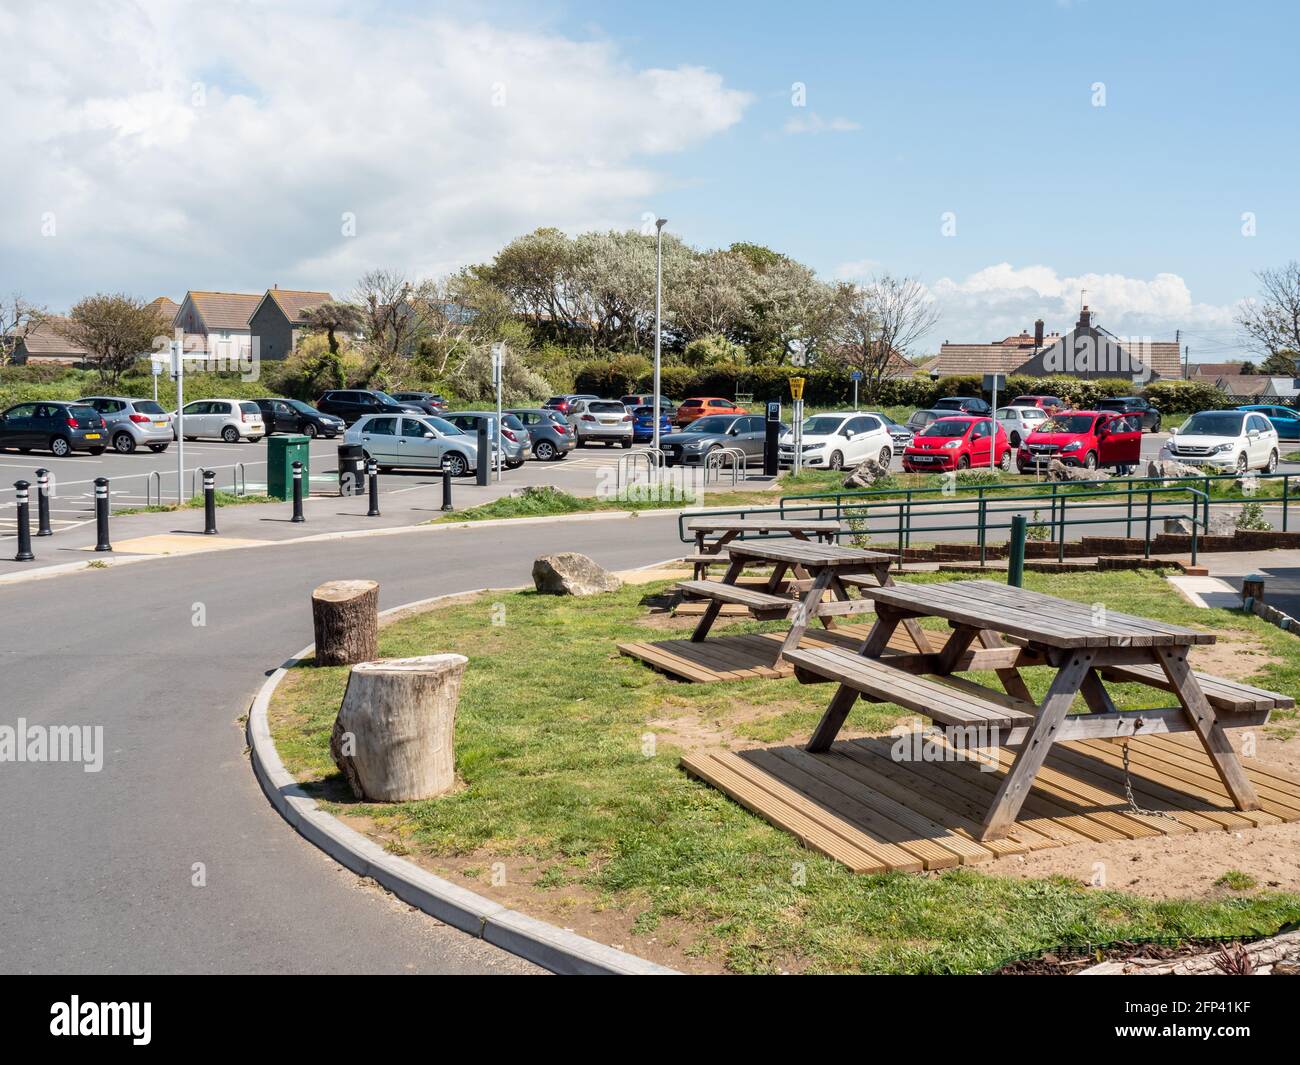 Car parking spaces at Sand Bay, near Weston-super-Mare in North Somerset, complete with small picnic and rest area. Stock Photo